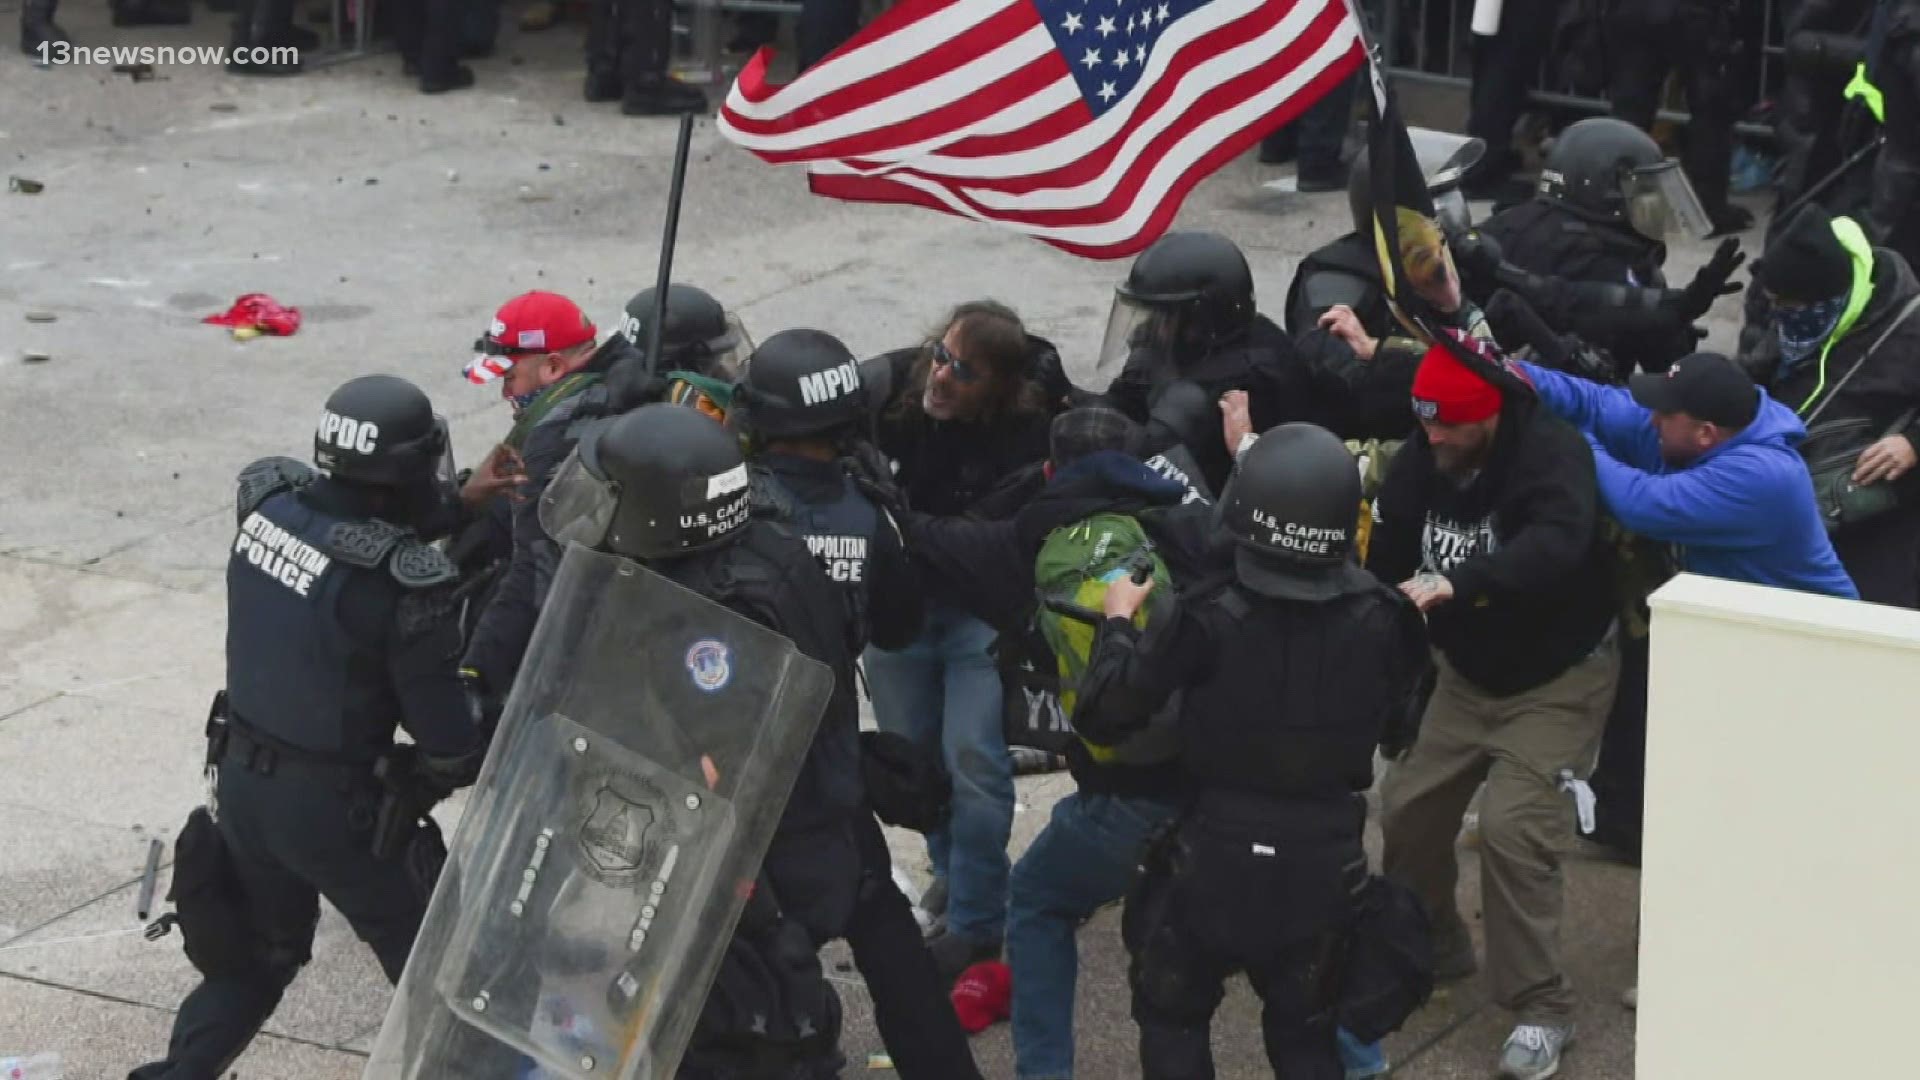 Violent protesters loyal to President Donald Trump have been cleared from the U.S. Capitol after storming the building and forcing lawmakers into hiding.